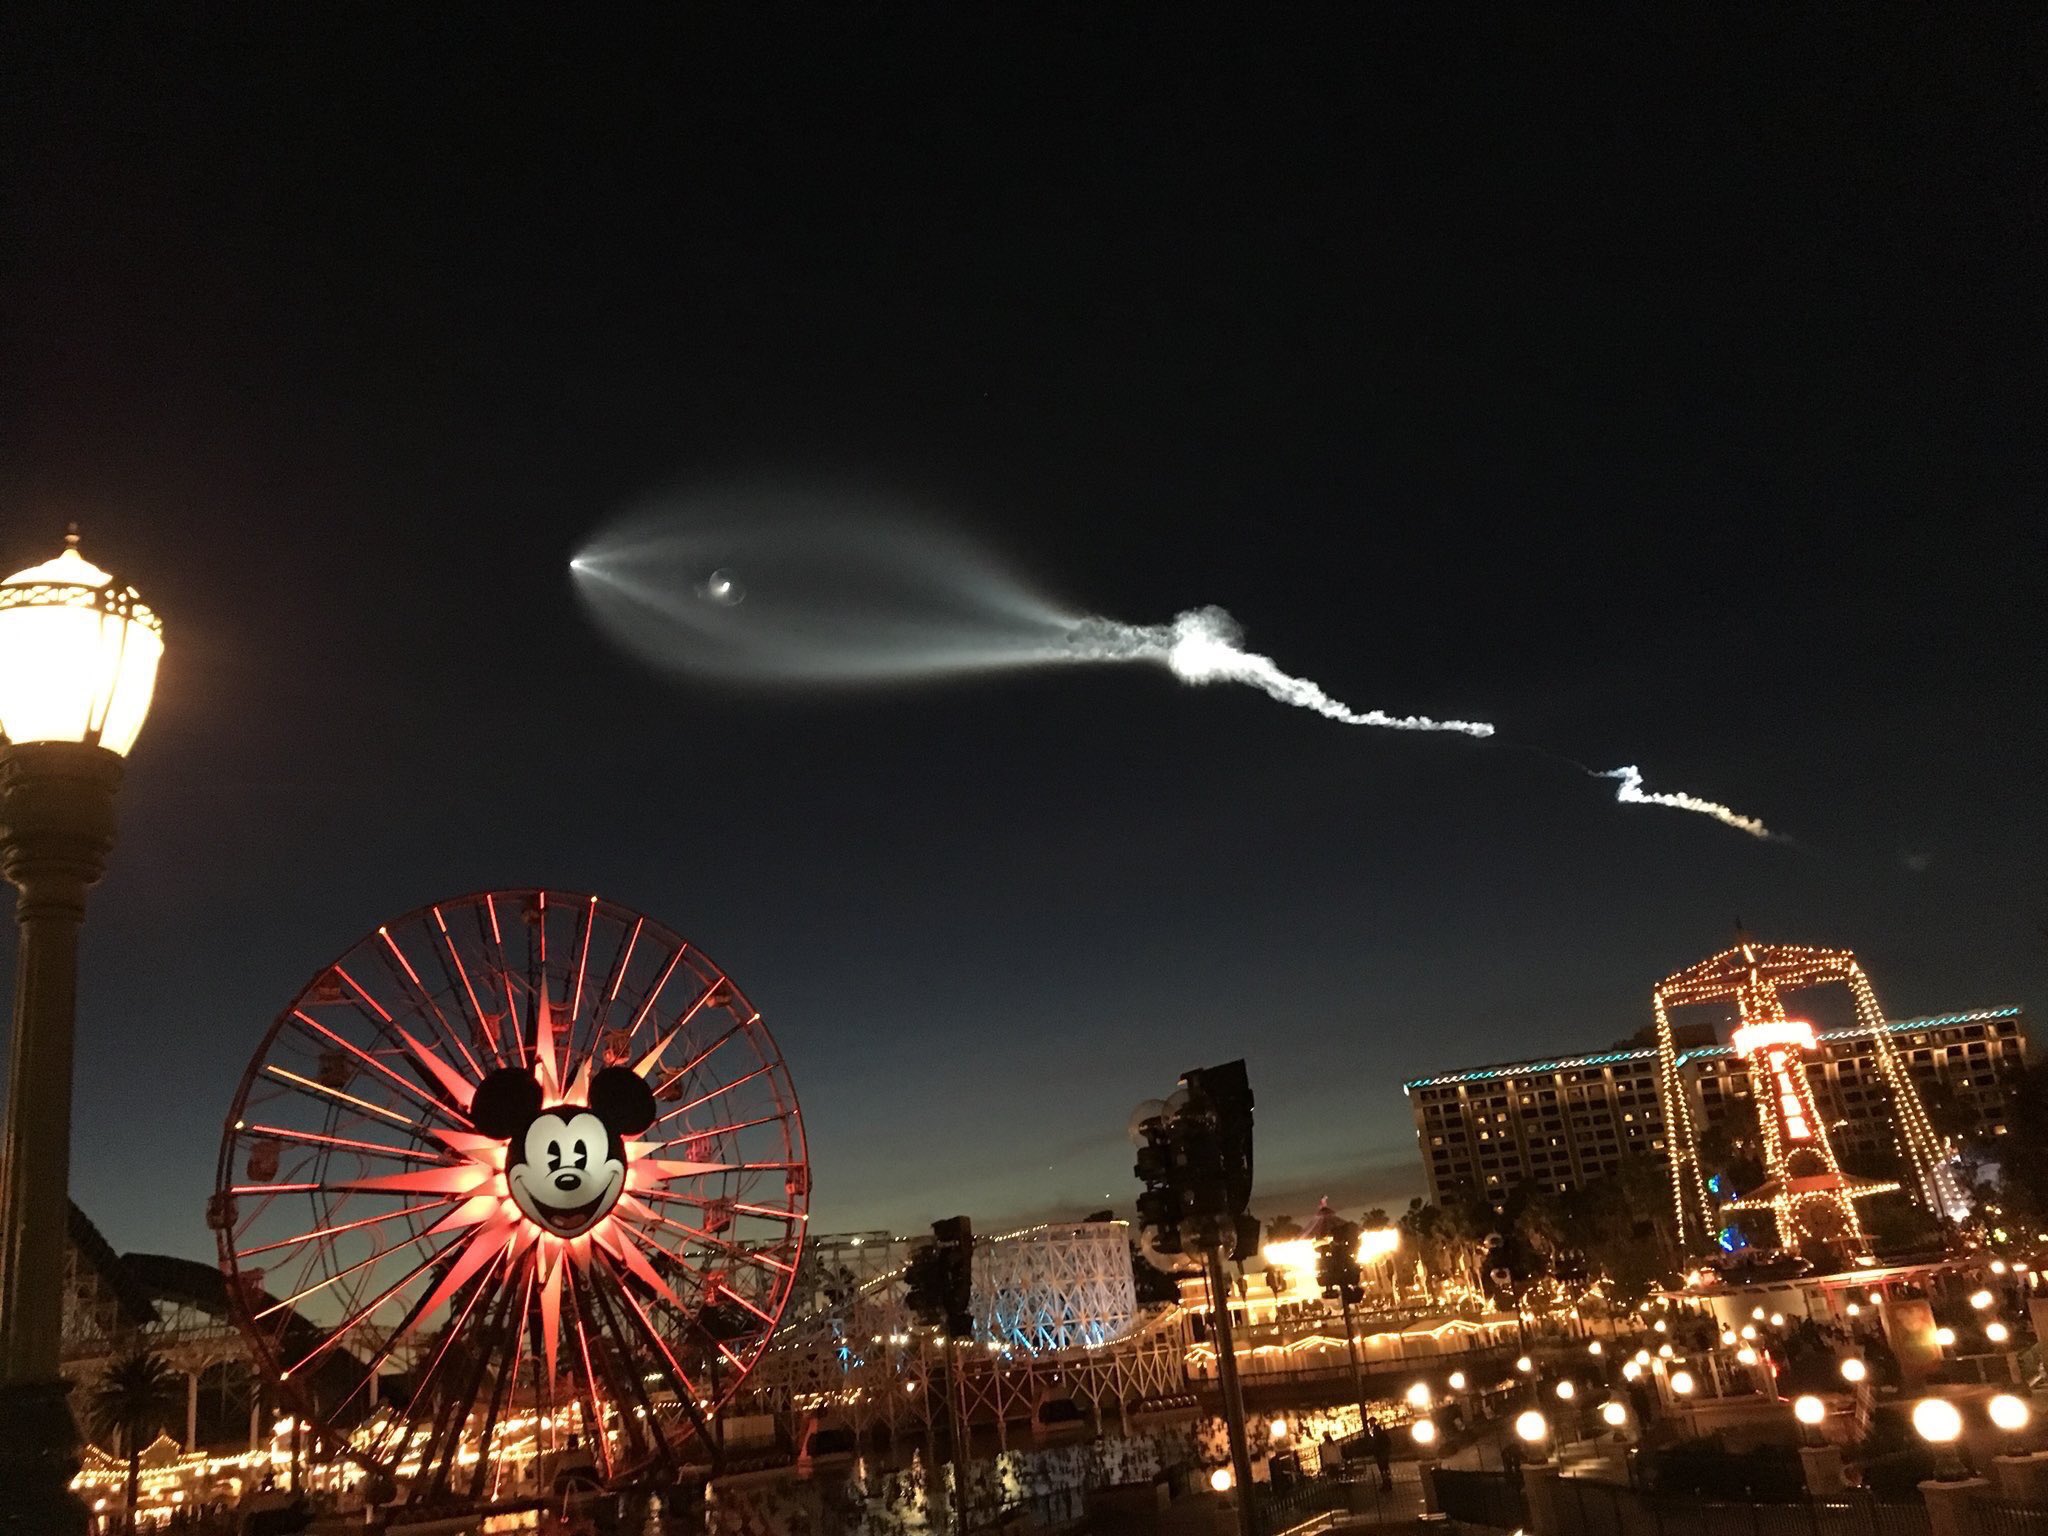 SpaceX Lights the Skies Up Over the Disneyland Resort